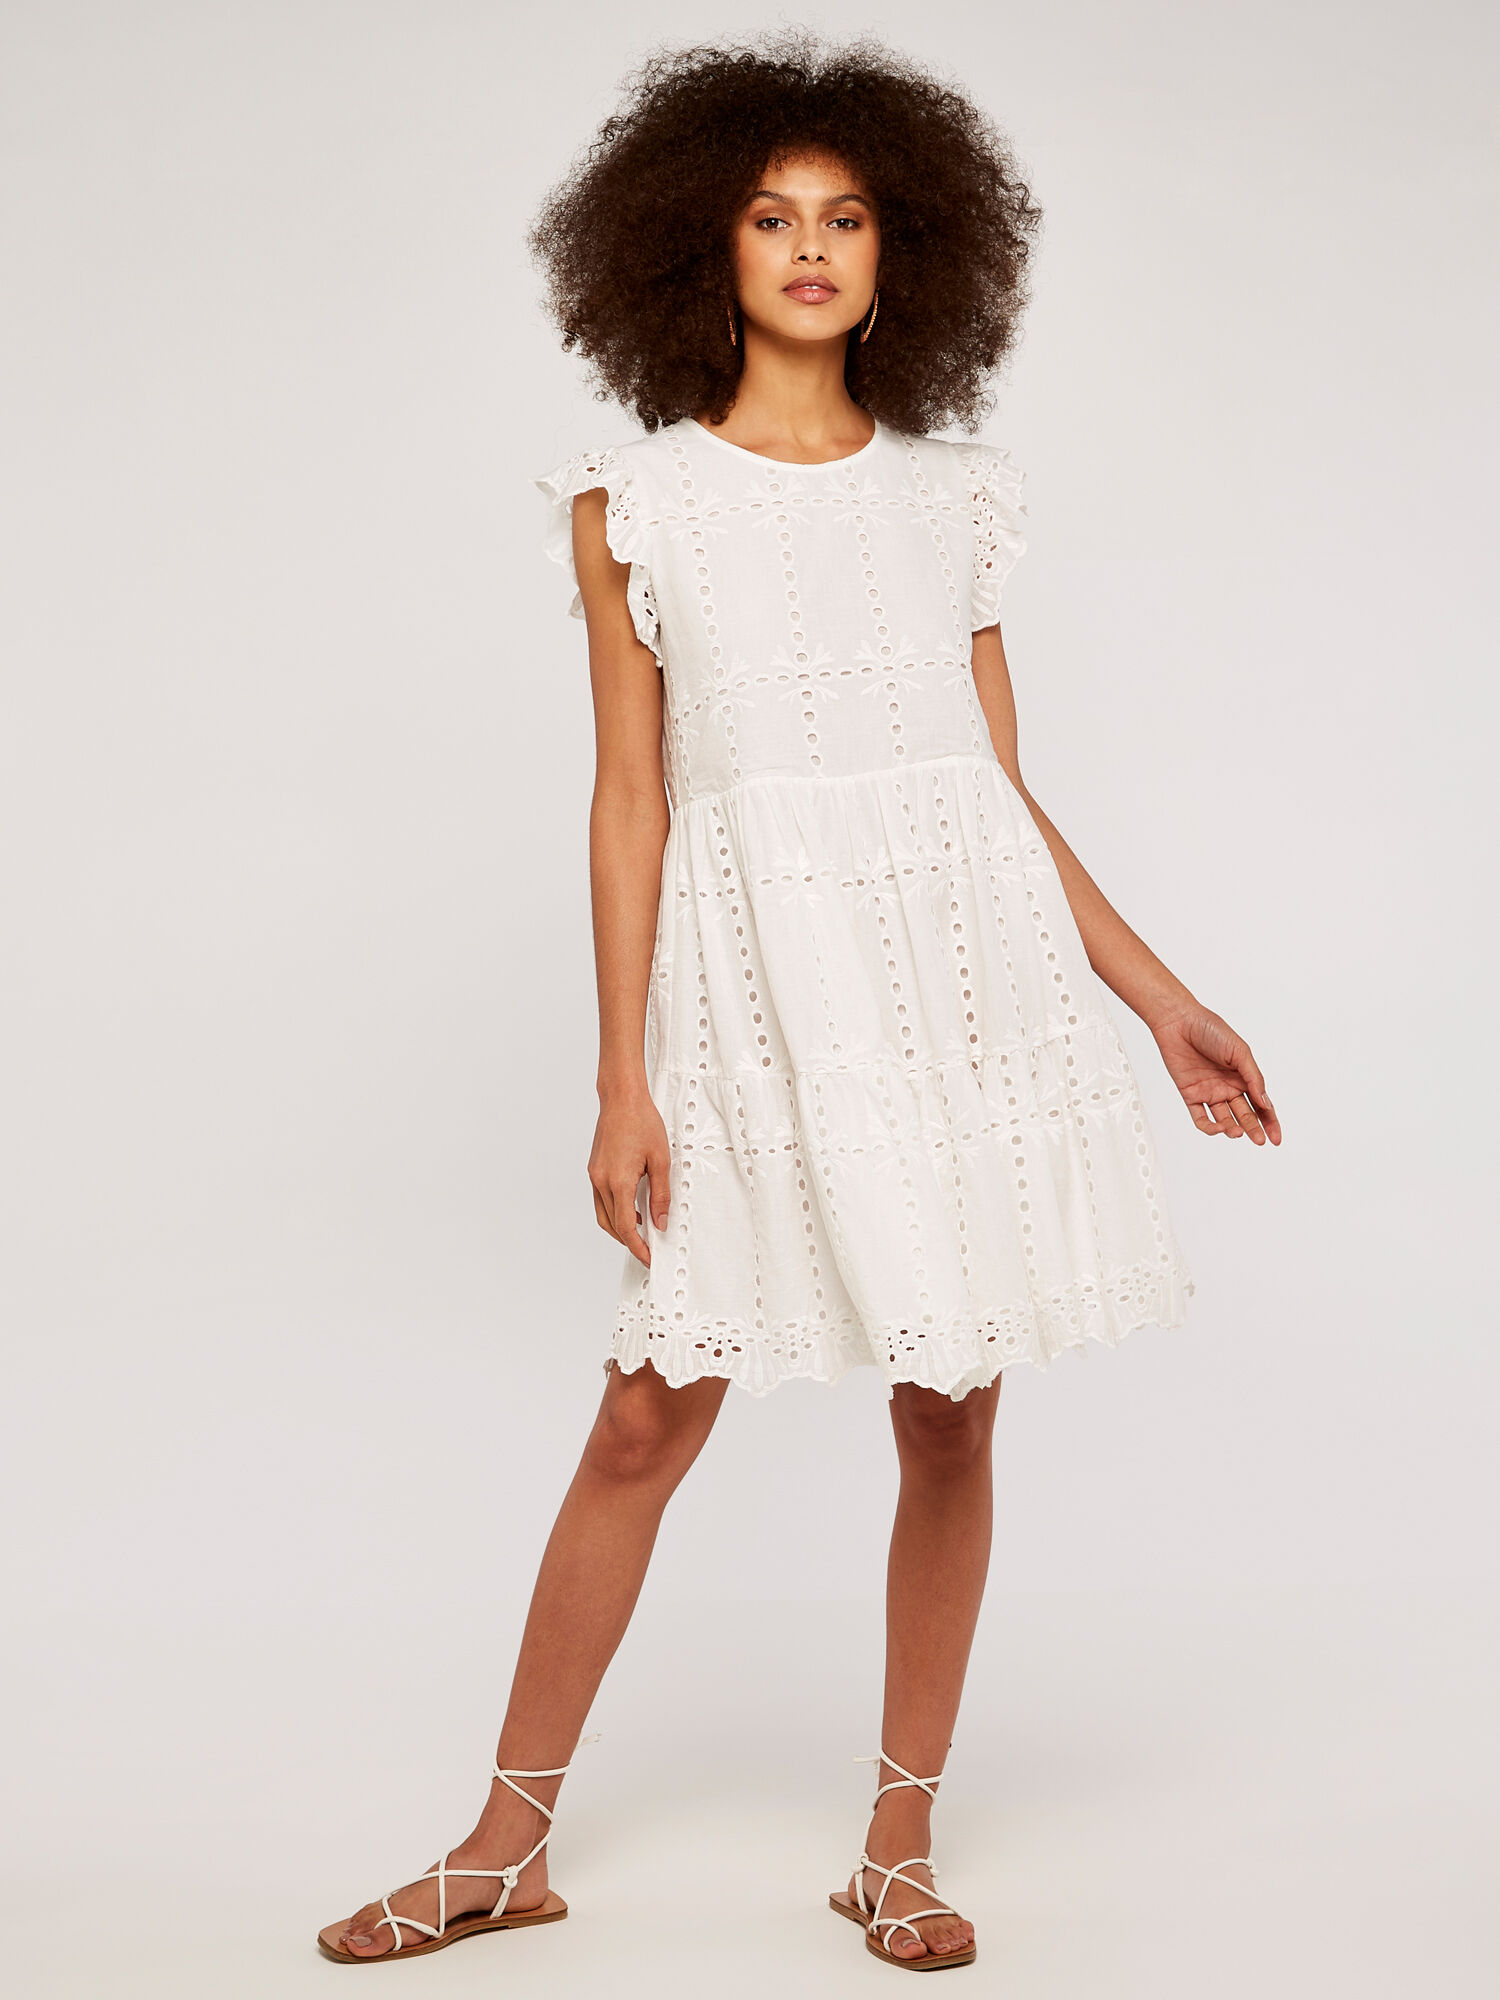 broderie anglaise dress uk